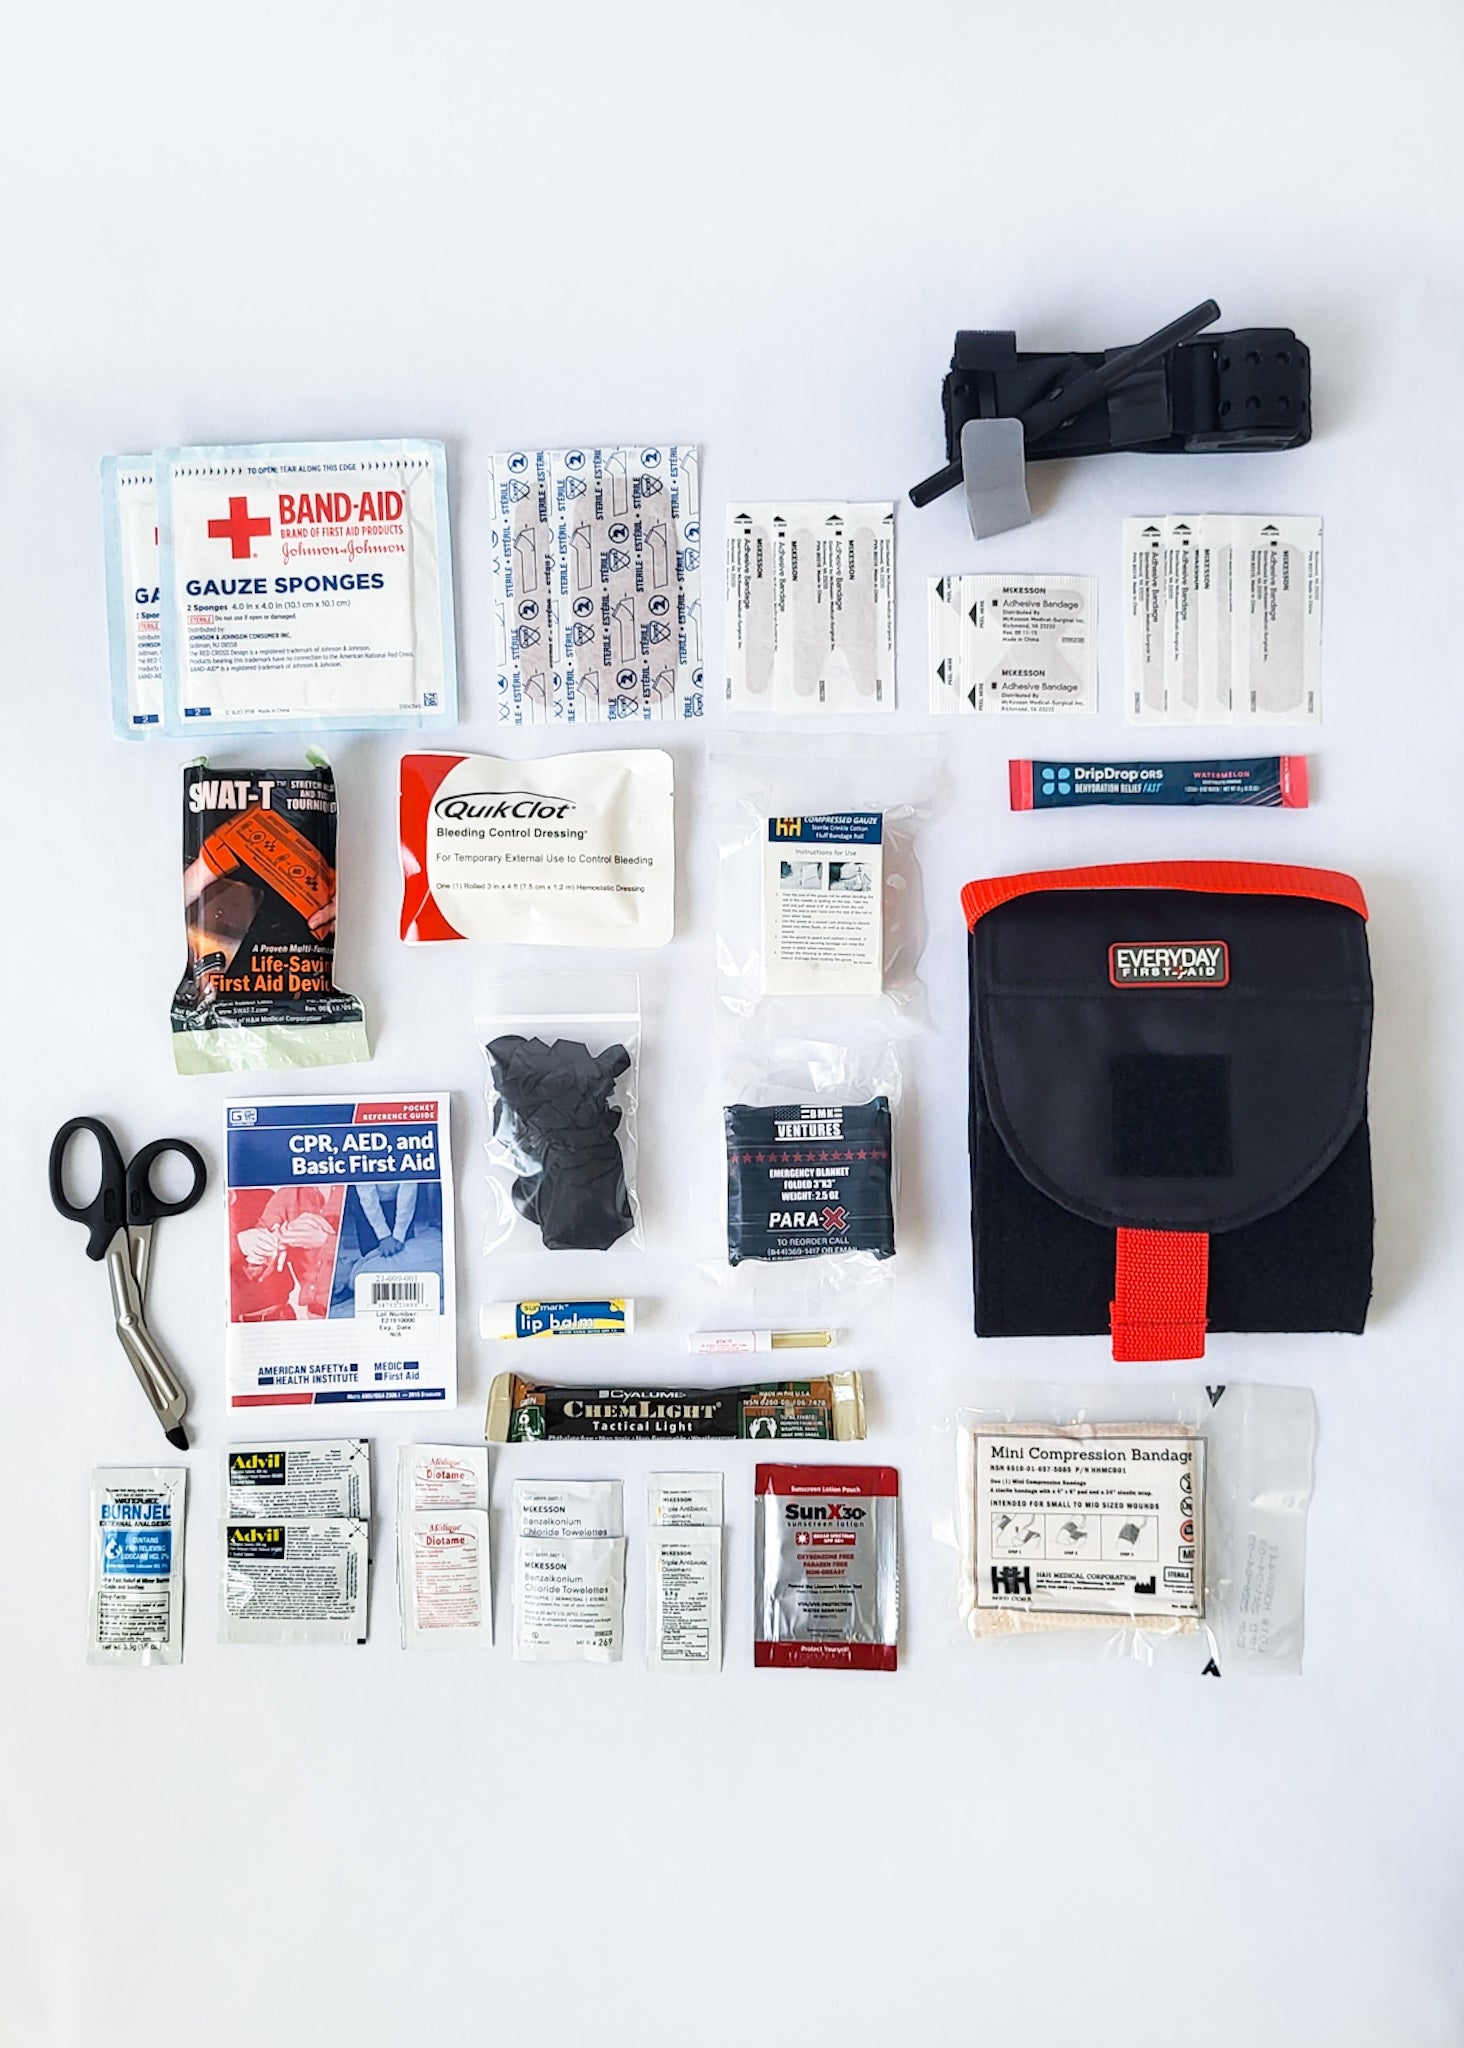 Motorcycle first aid kit with SAM XT tourniquet contents